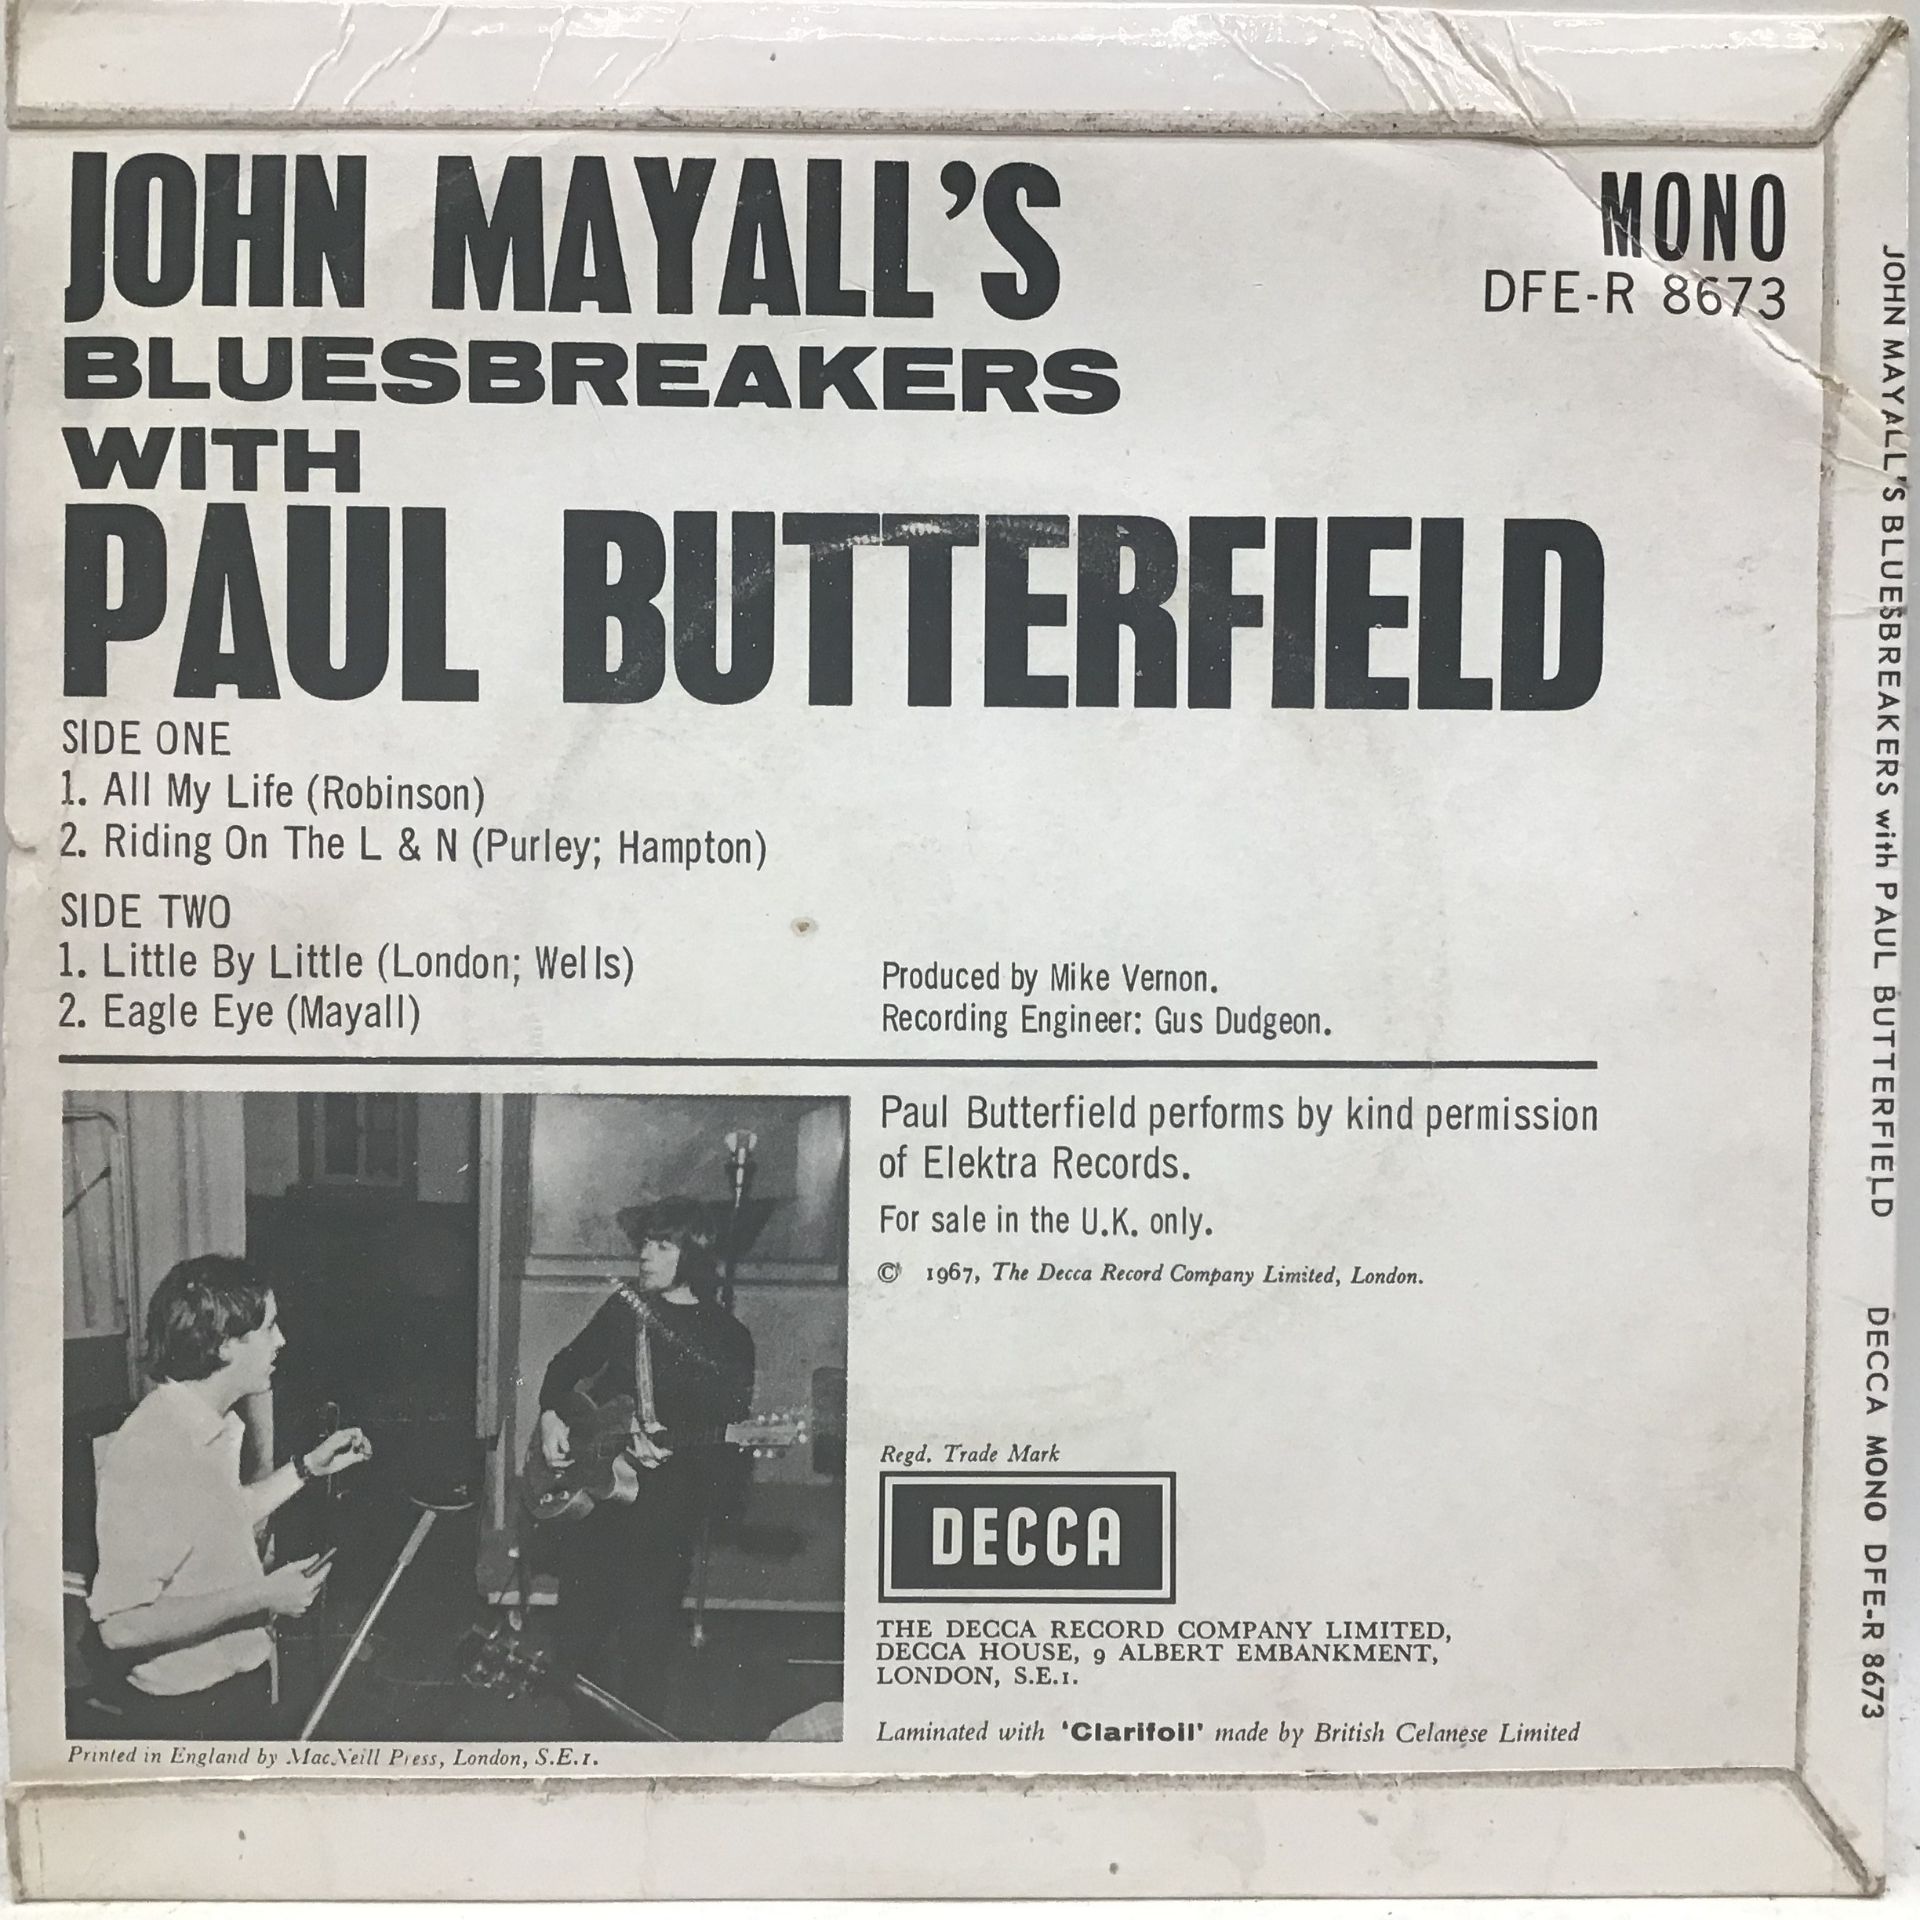 JOHN MAYALL'S BLUESBREAKERS WITH PAUL BUTTERFIELD UK EP. This is a nice blues EP on Decca DFE-R 8673 - Image 2 of 2